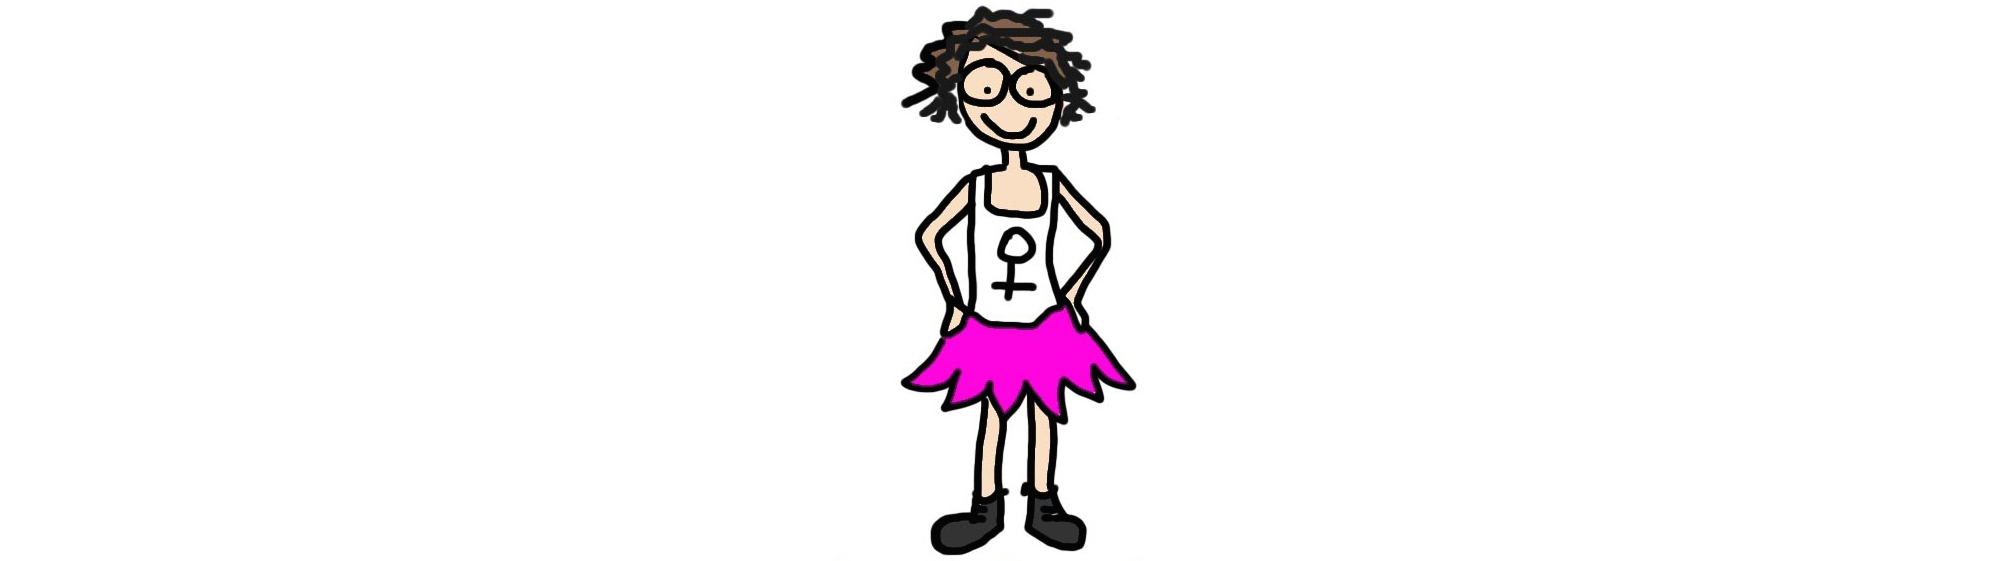 a light-skinned, curly-haired feminine person, wearing glasses, a pink skirt, dark boots, and a white tank top with a female symbol on it